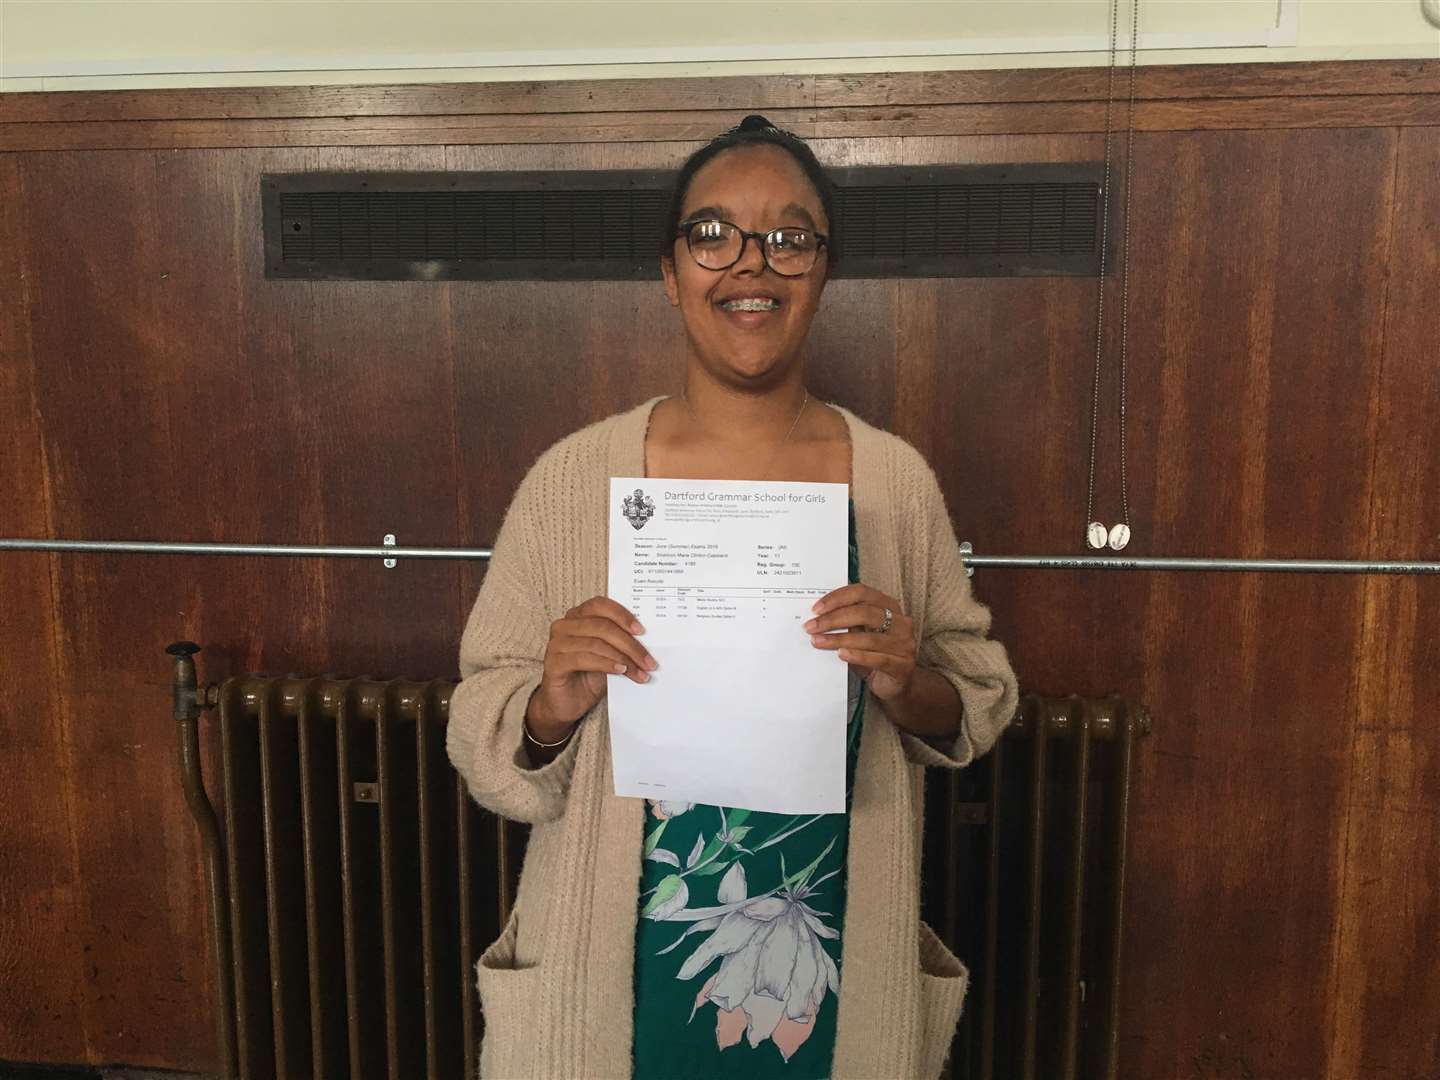 Dartford Girls Grammar School's Shannon Clinton-Copeland, 18, will be heading to the university of East Anglia in September to study English Literature and creative writing (15273281)